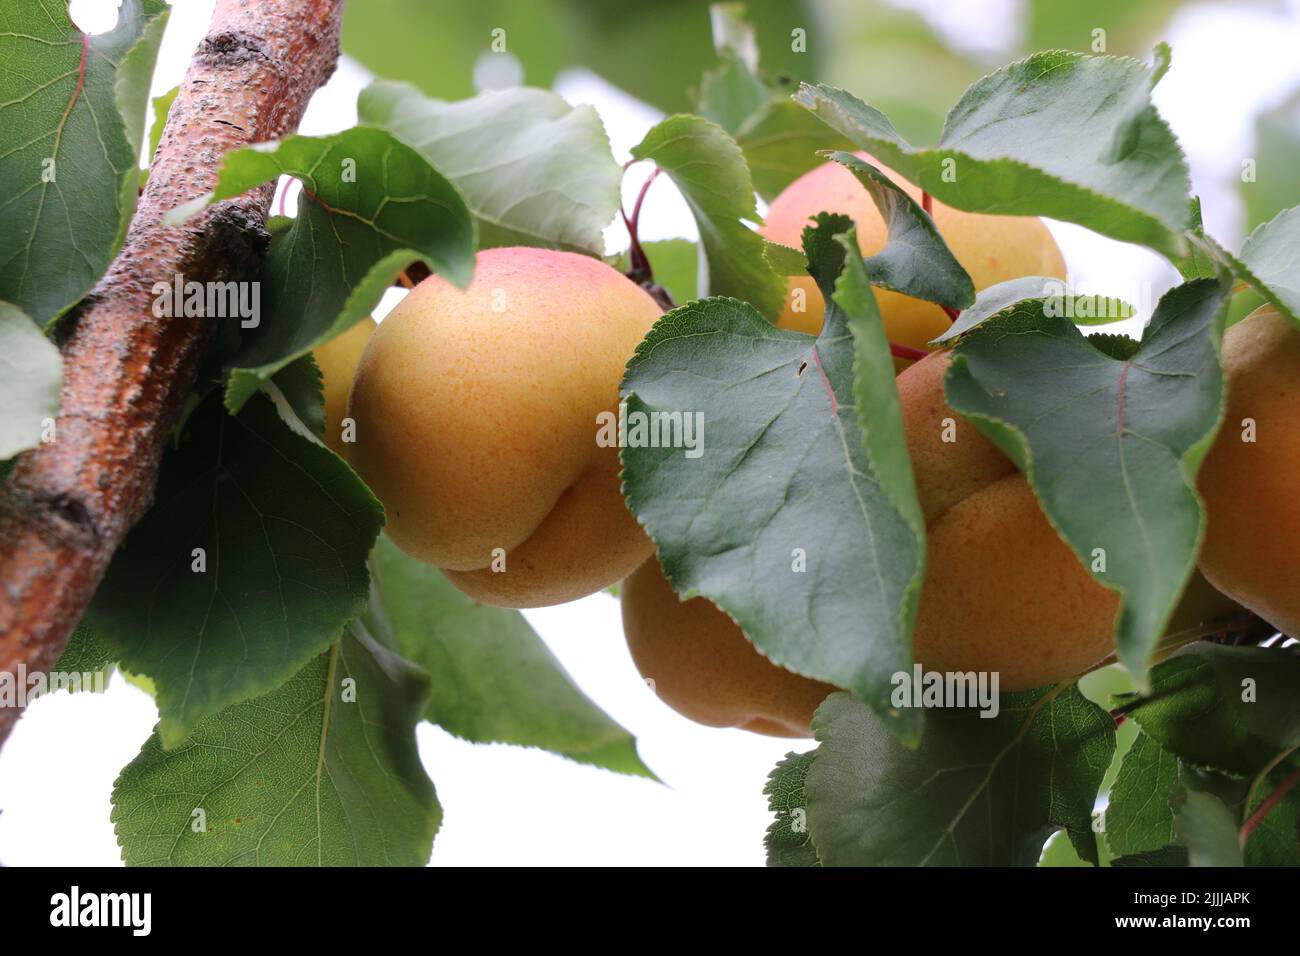 Apricot tree, branches loaded with clusters of bright orange fruit, ready to be picked. Stock Photo